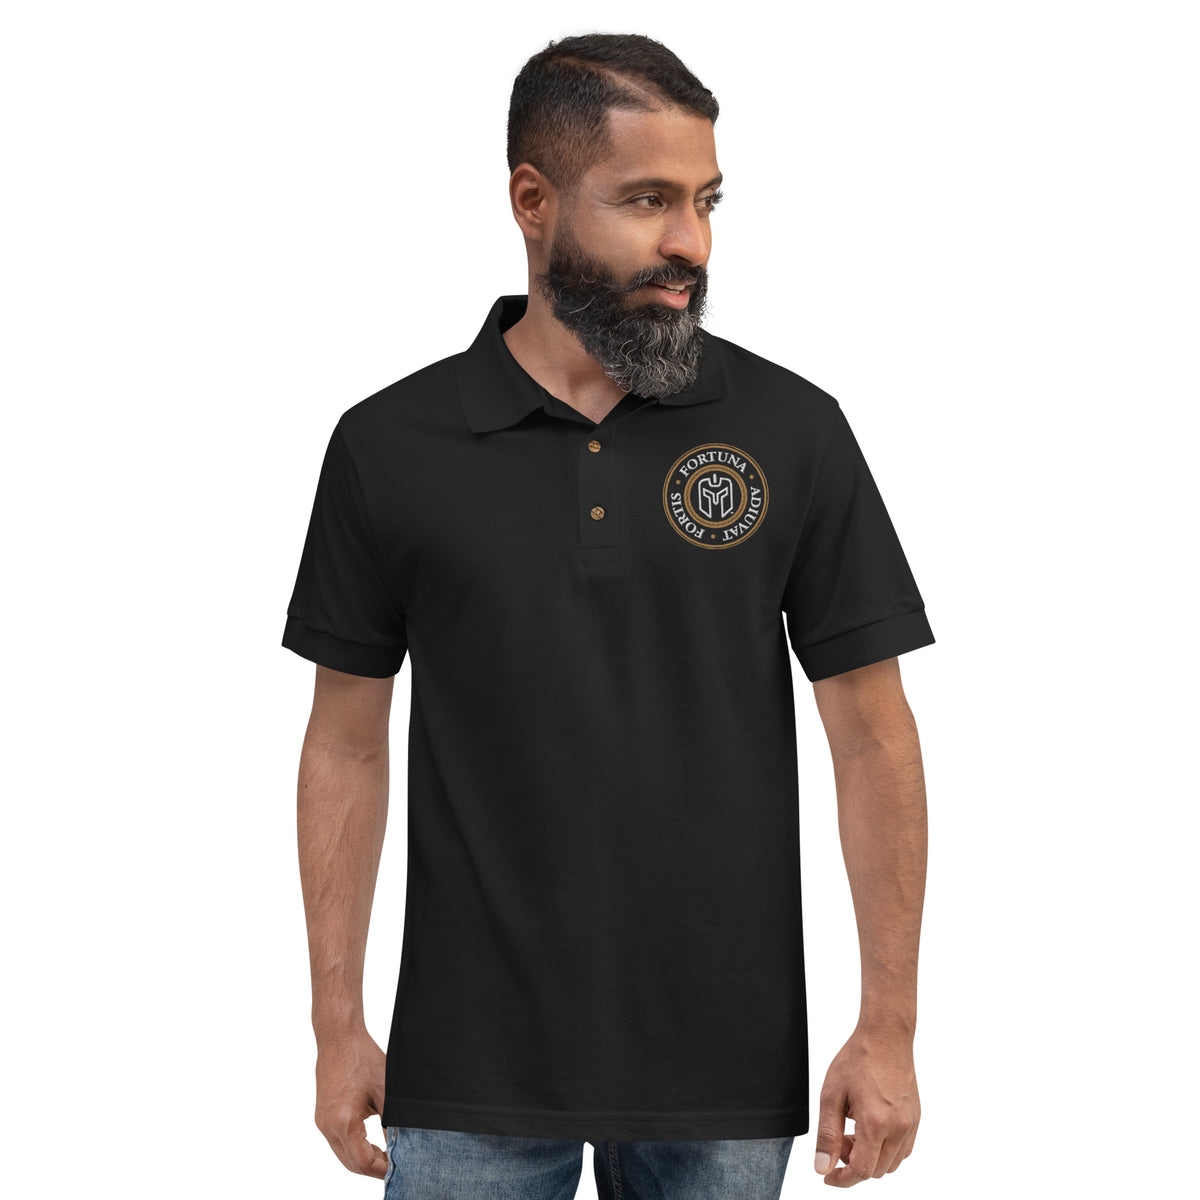 FORTIS FORTUNA ADIUVAT- Fortune Favors The Bold- Warrior  Embroidered Polo Shirt